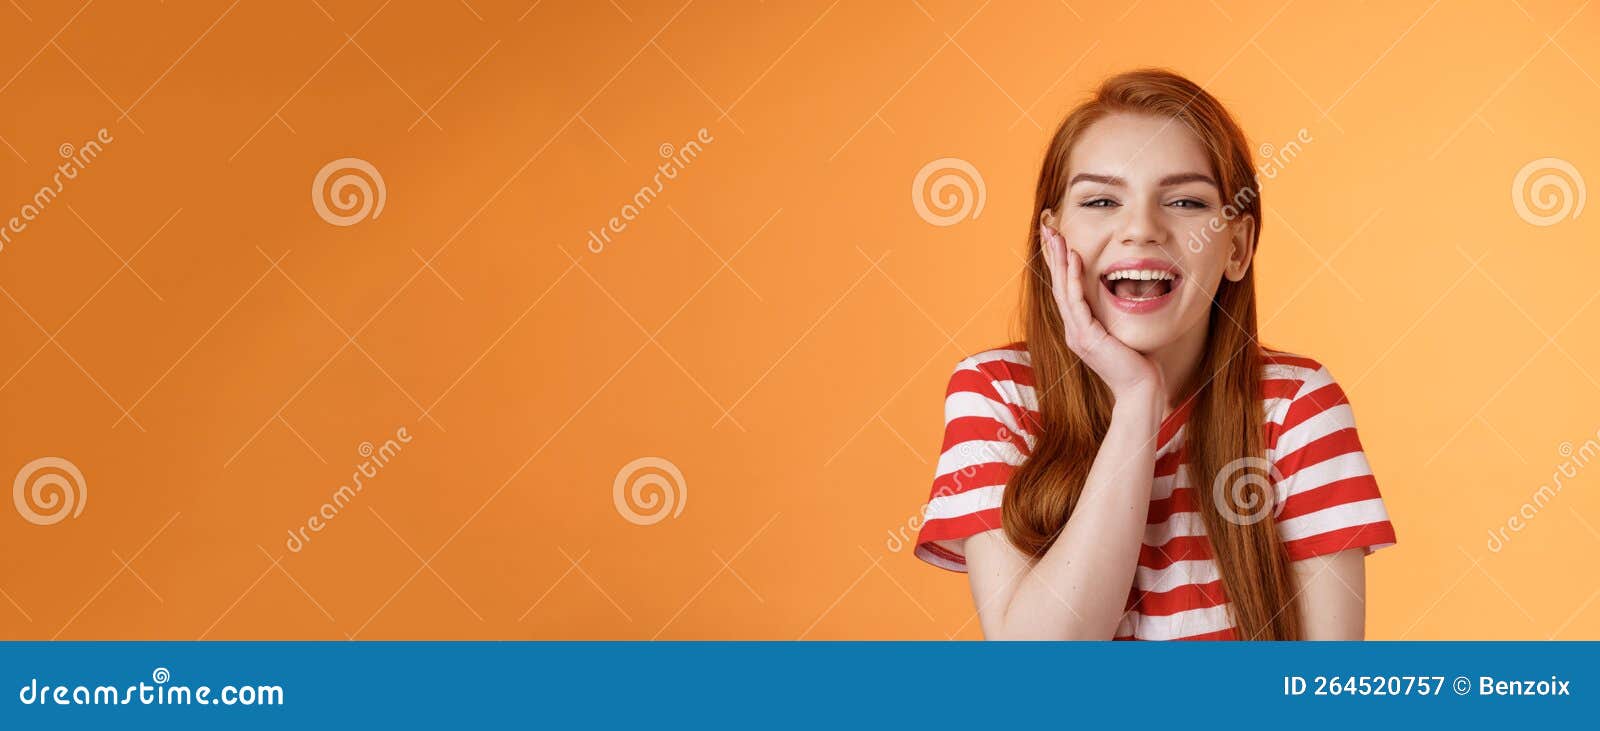 Cute Cheerful Smiling Redhead Woman Talking Friends Laughing Out Loud Happily Showing Healthy 